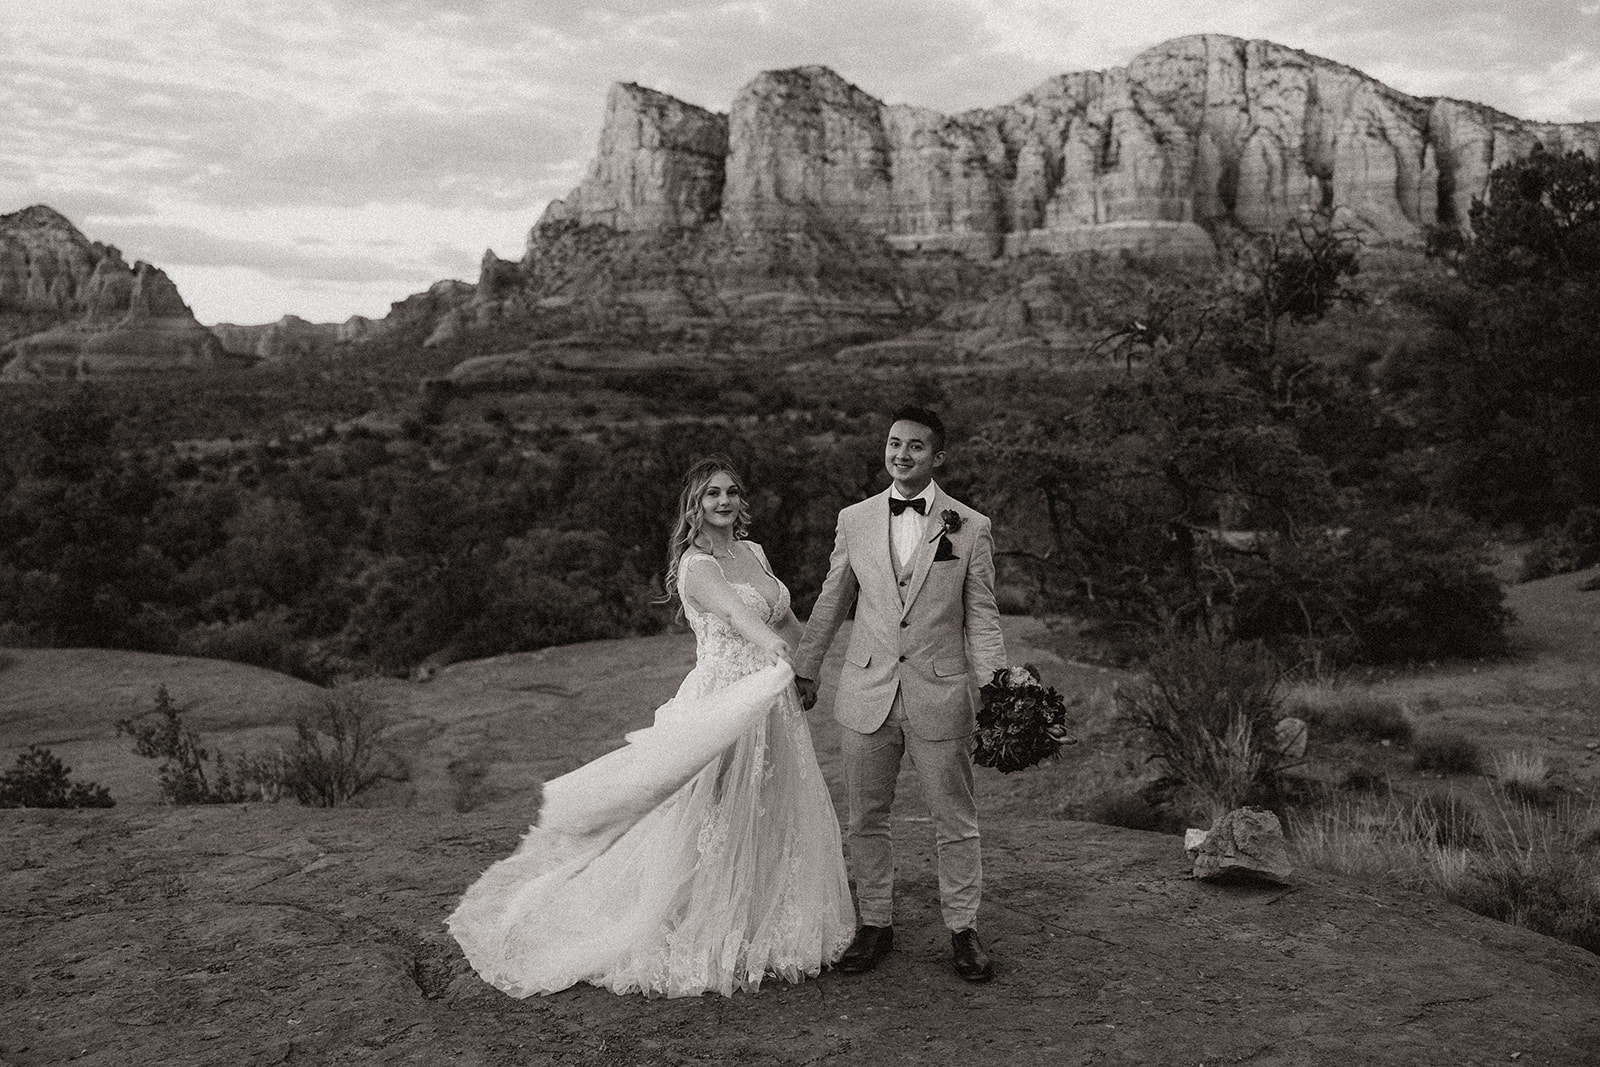 Arizona desert elopement sight ready for the big day at Bell Rock.